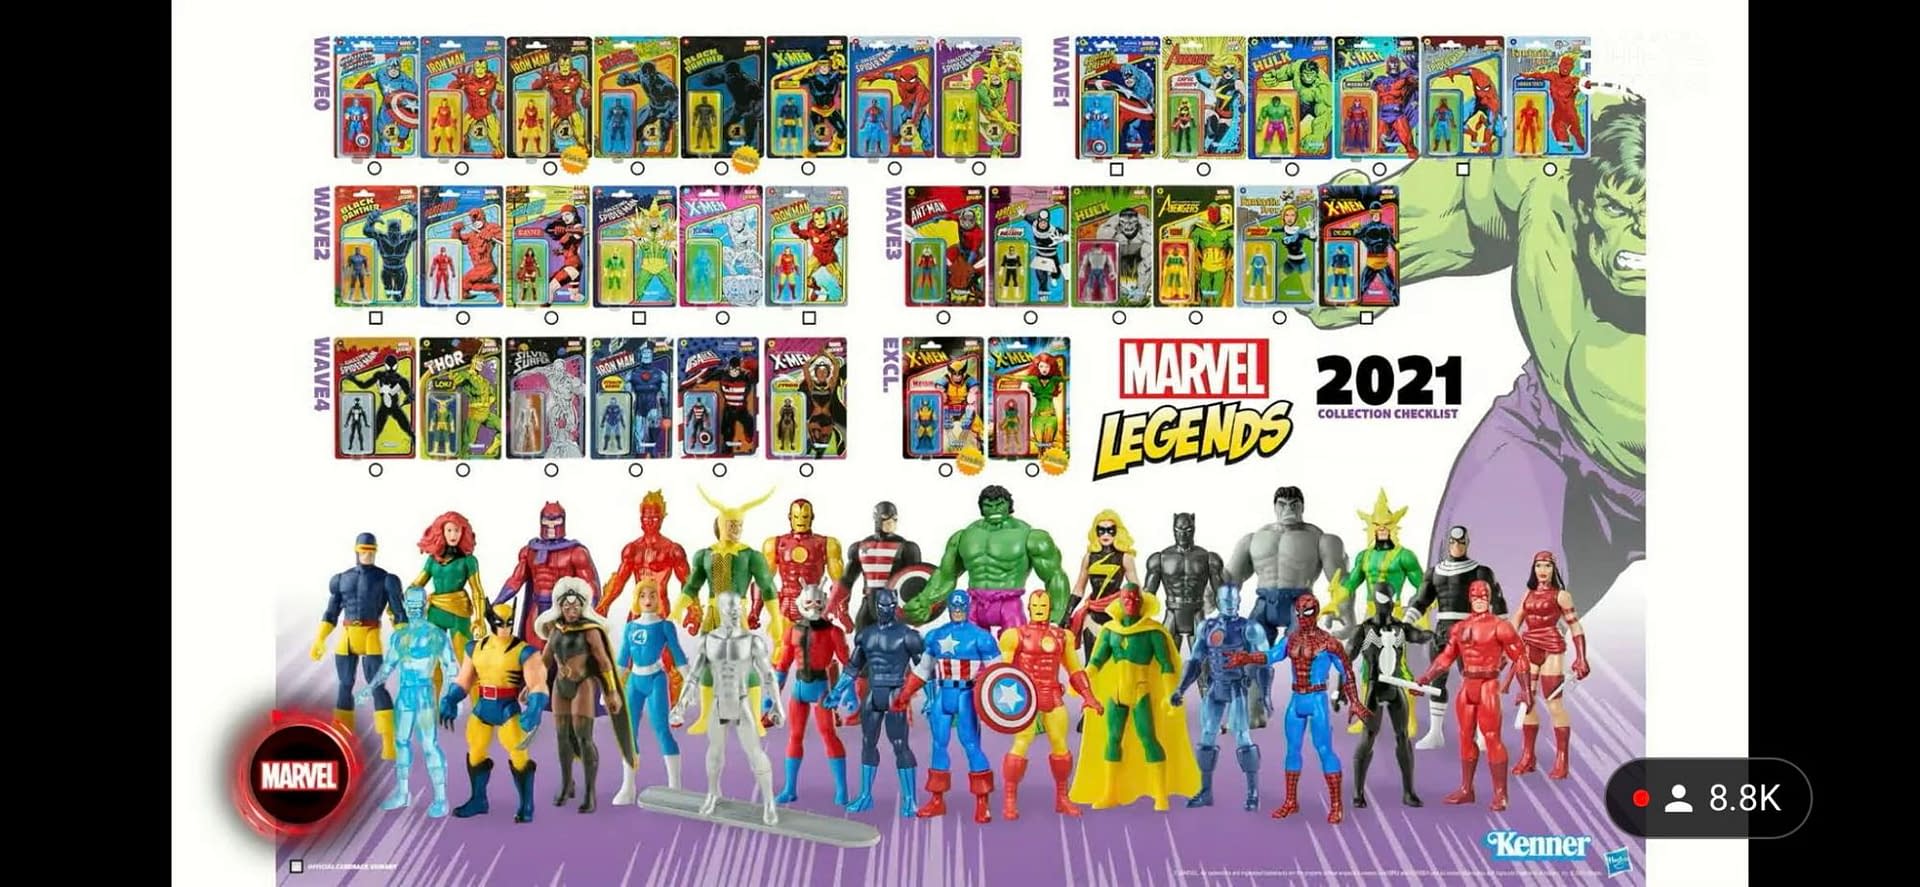 Marvel Legends Reveals Come Fast And Furious At Hasbro PulseCon